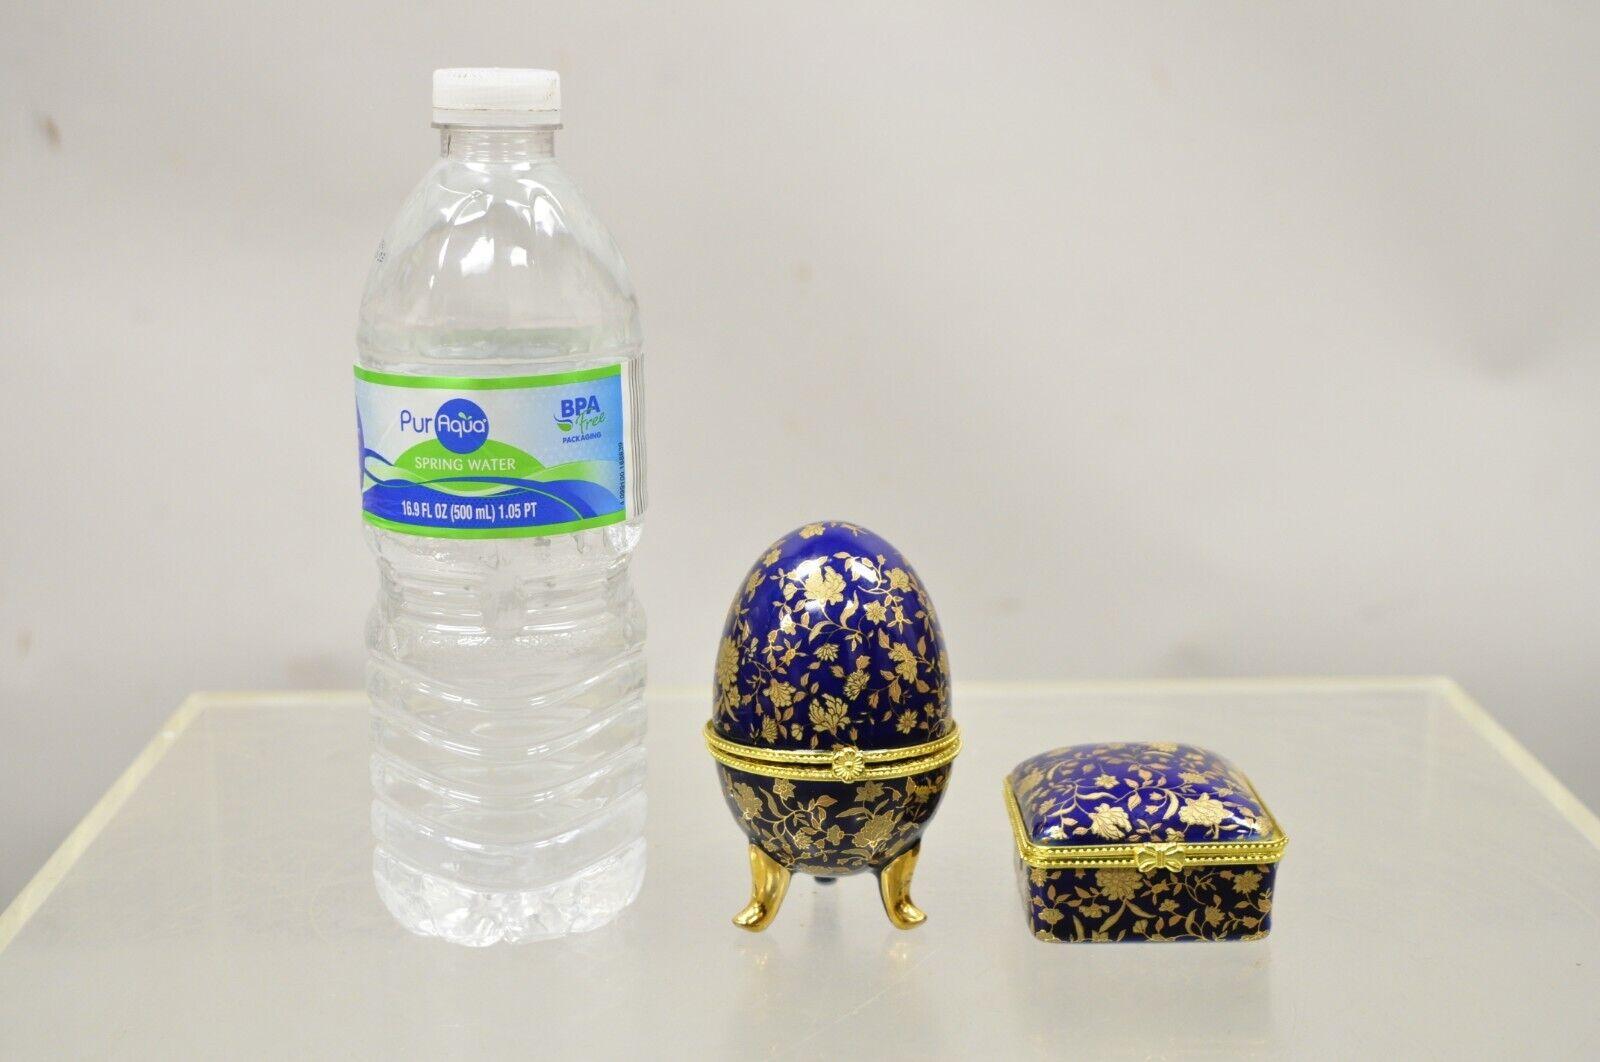 Cobalt Blue Porcelain Egg Gold Gilt hinged lid candle trinket box - 2 pcs. Item featurs a porcelain construction, gold gilt details, raised on feet, small hinged box included. Circa Late 20th Century.
Measurements: 
Egg: 3.5